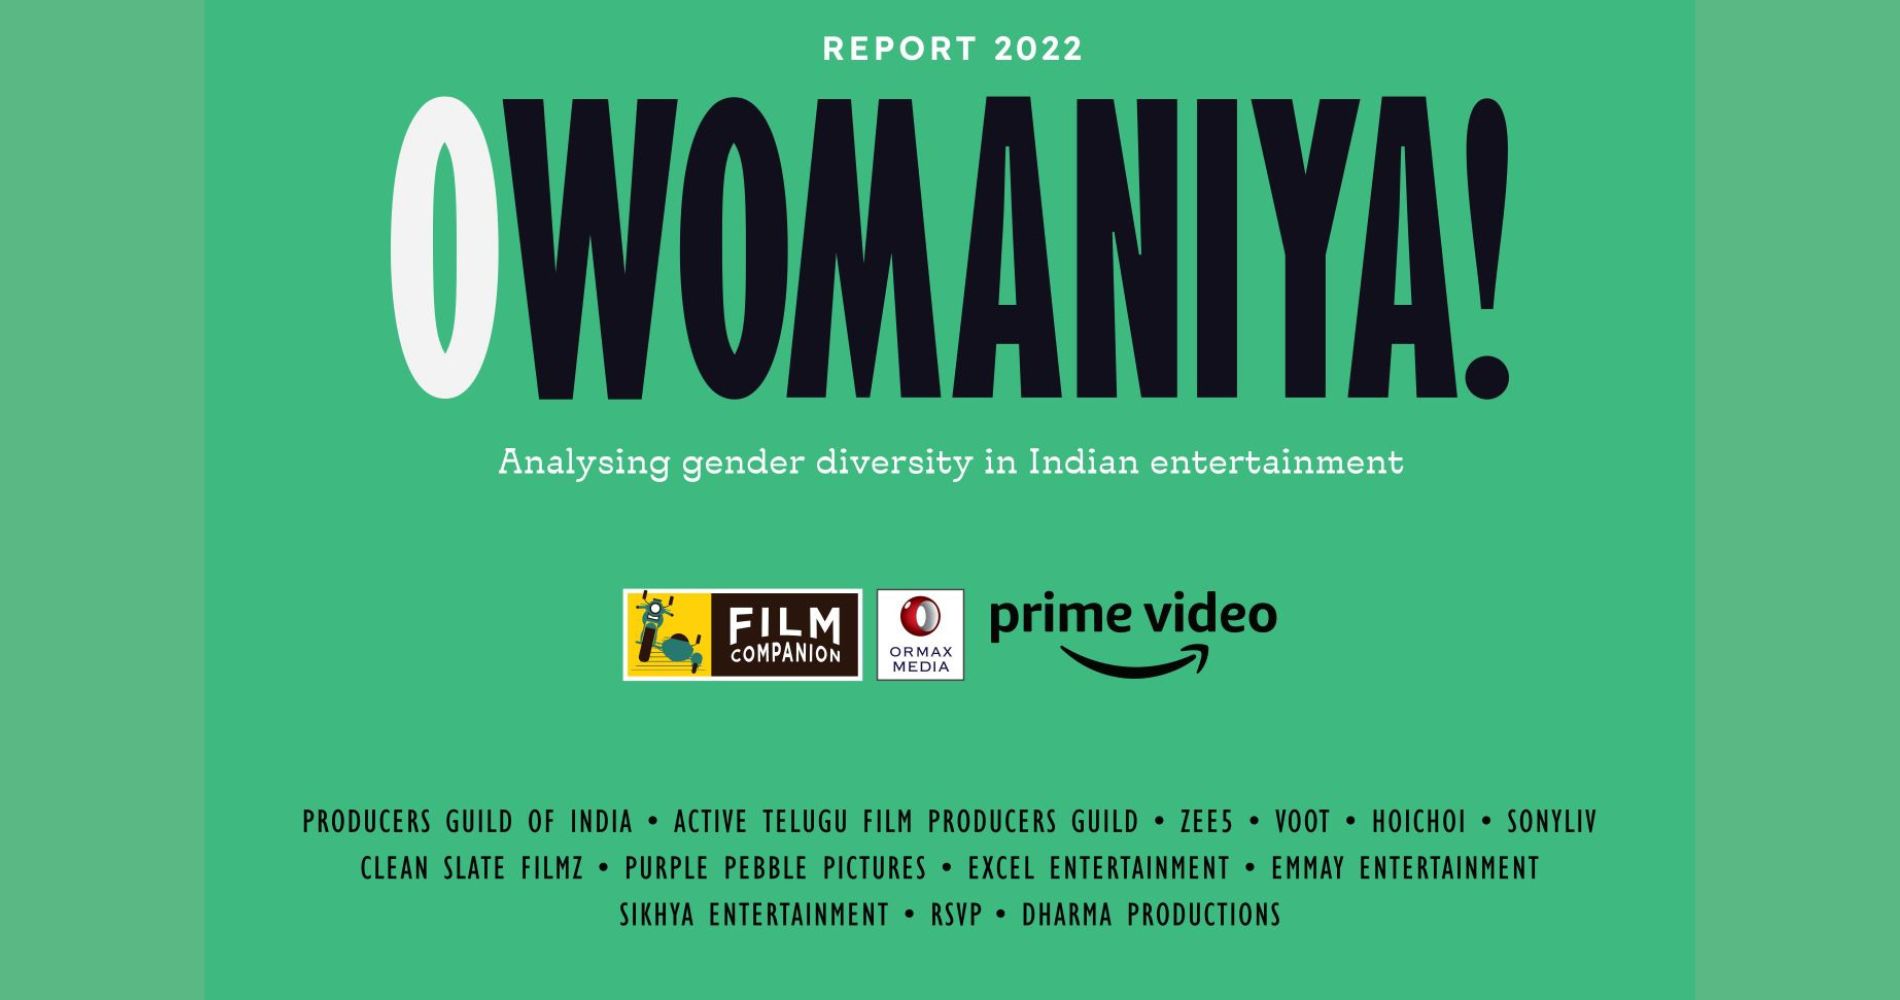 Amazon Prime Video announcing the launch of the O Womaniya!